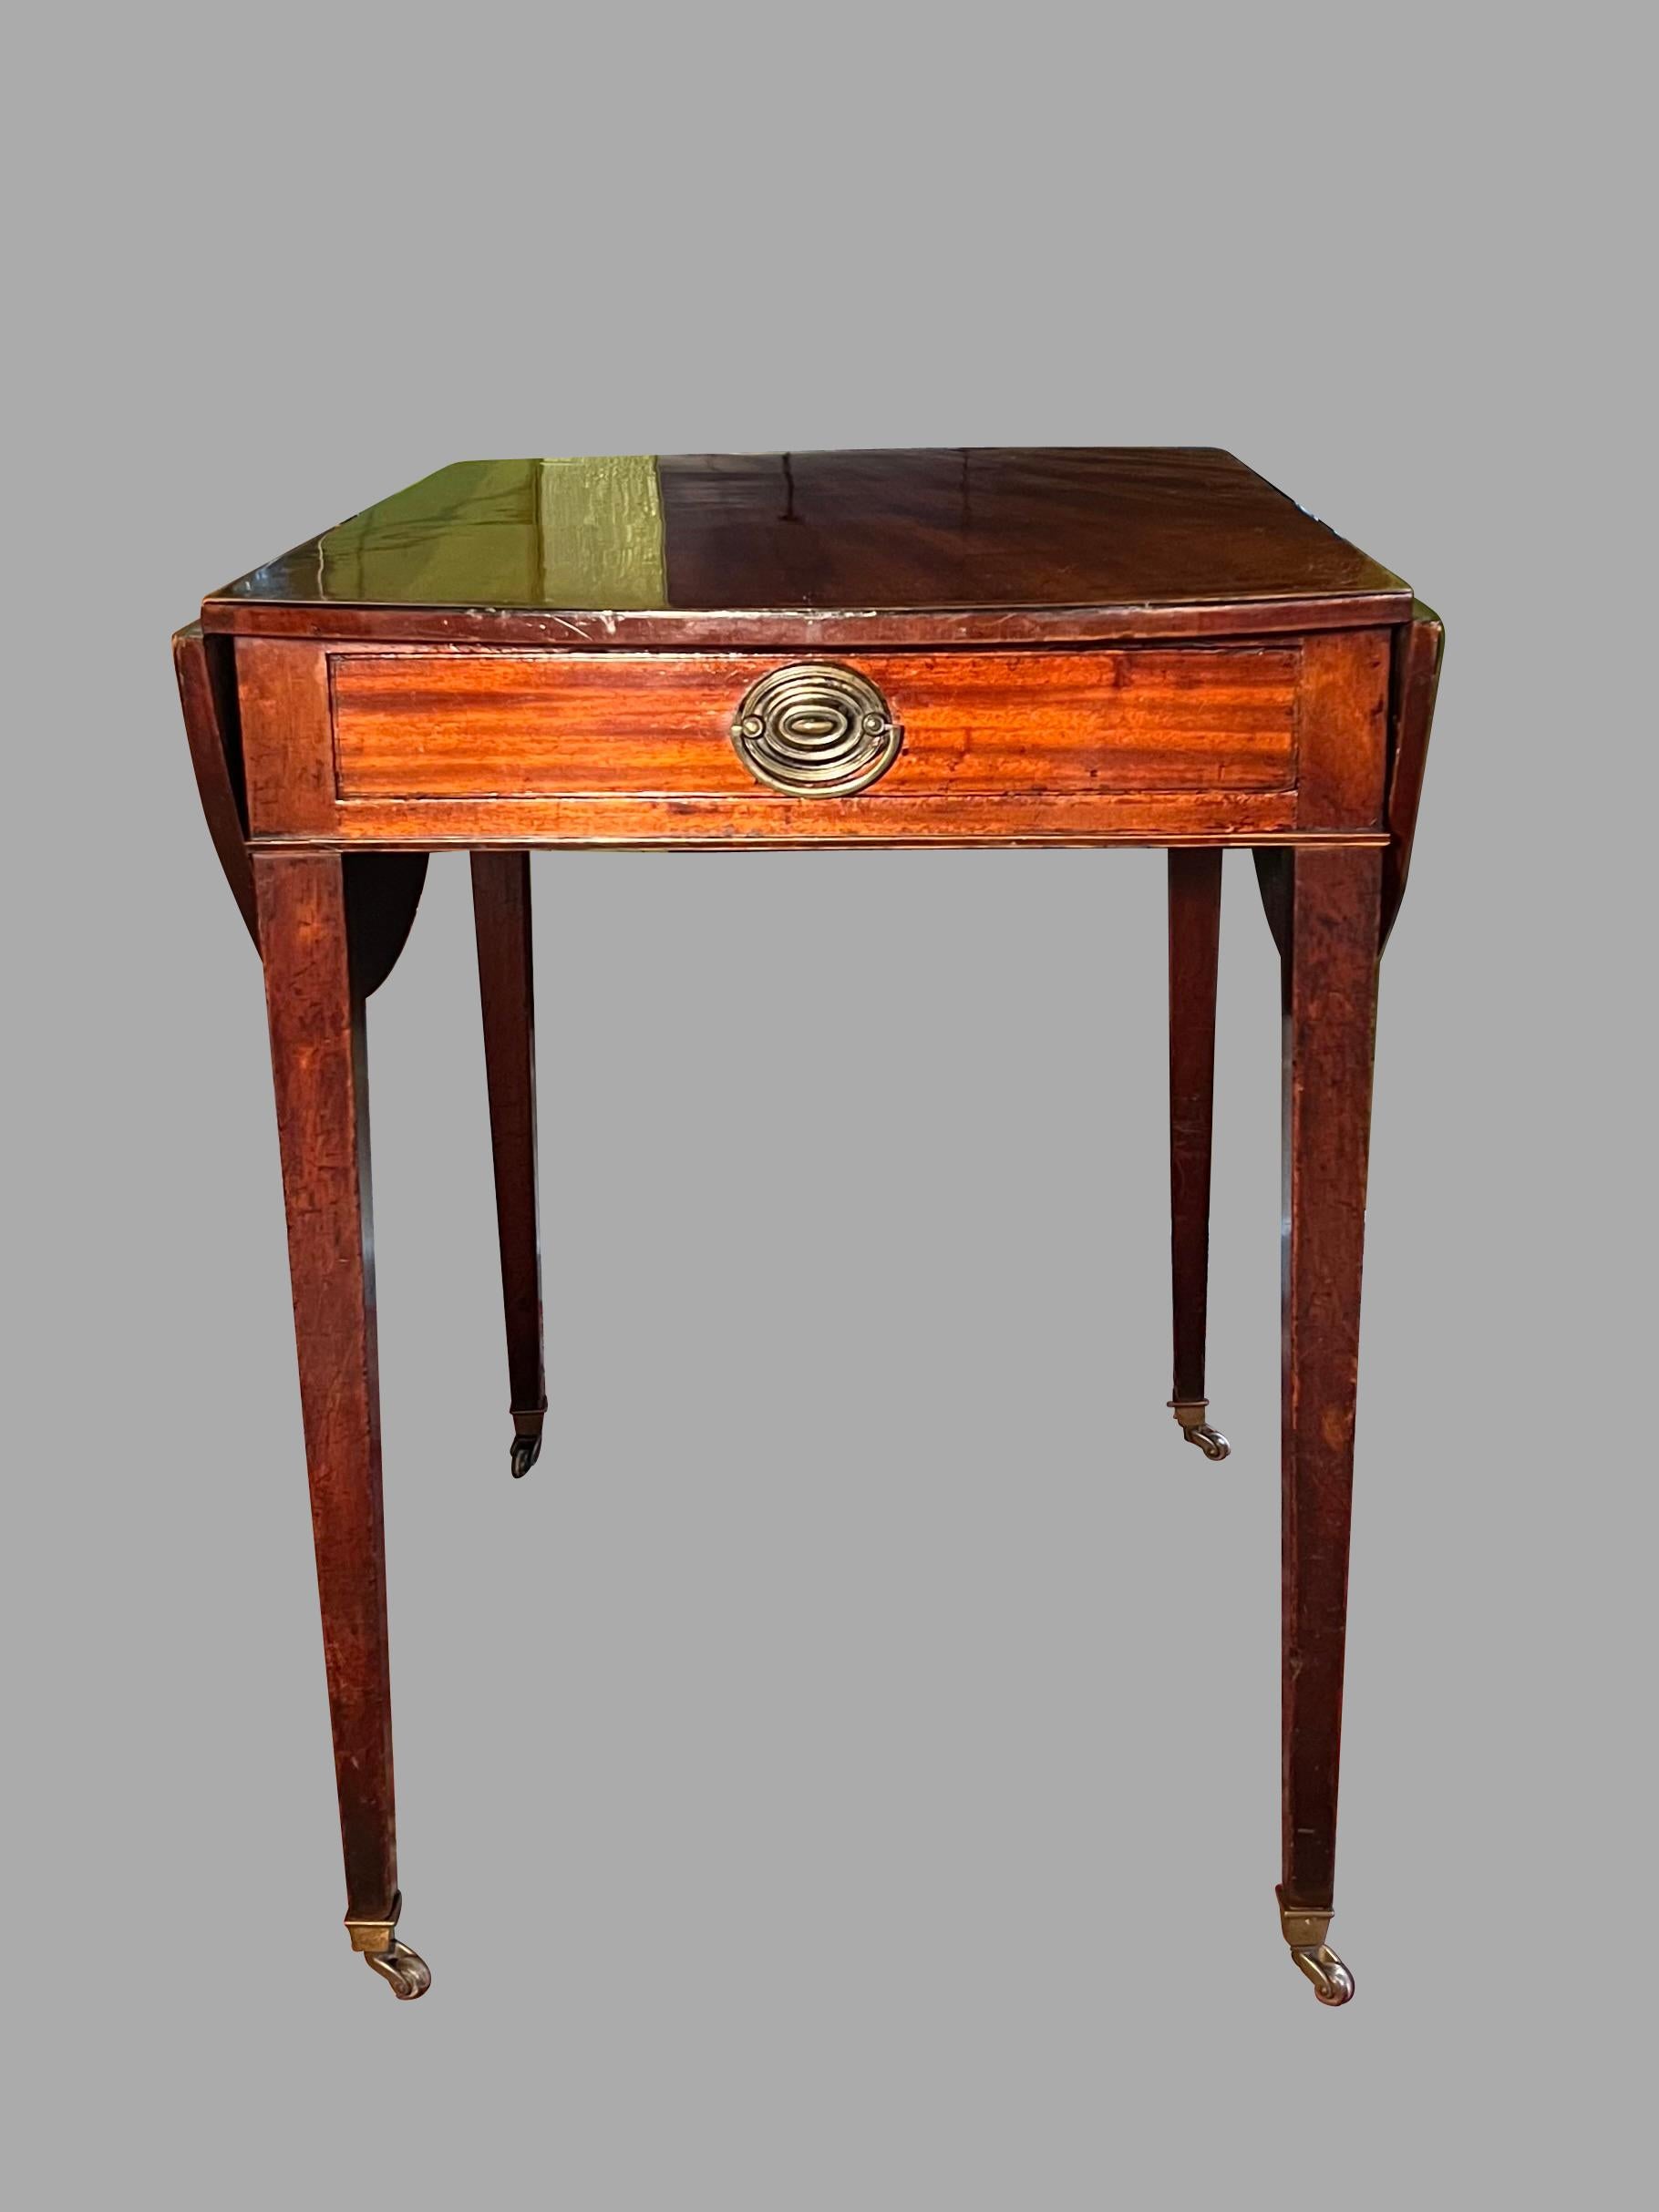 18th Century Fine English Inlaid Mahogany Hepplewhite Period Pembroke Table with Drawer For Sale